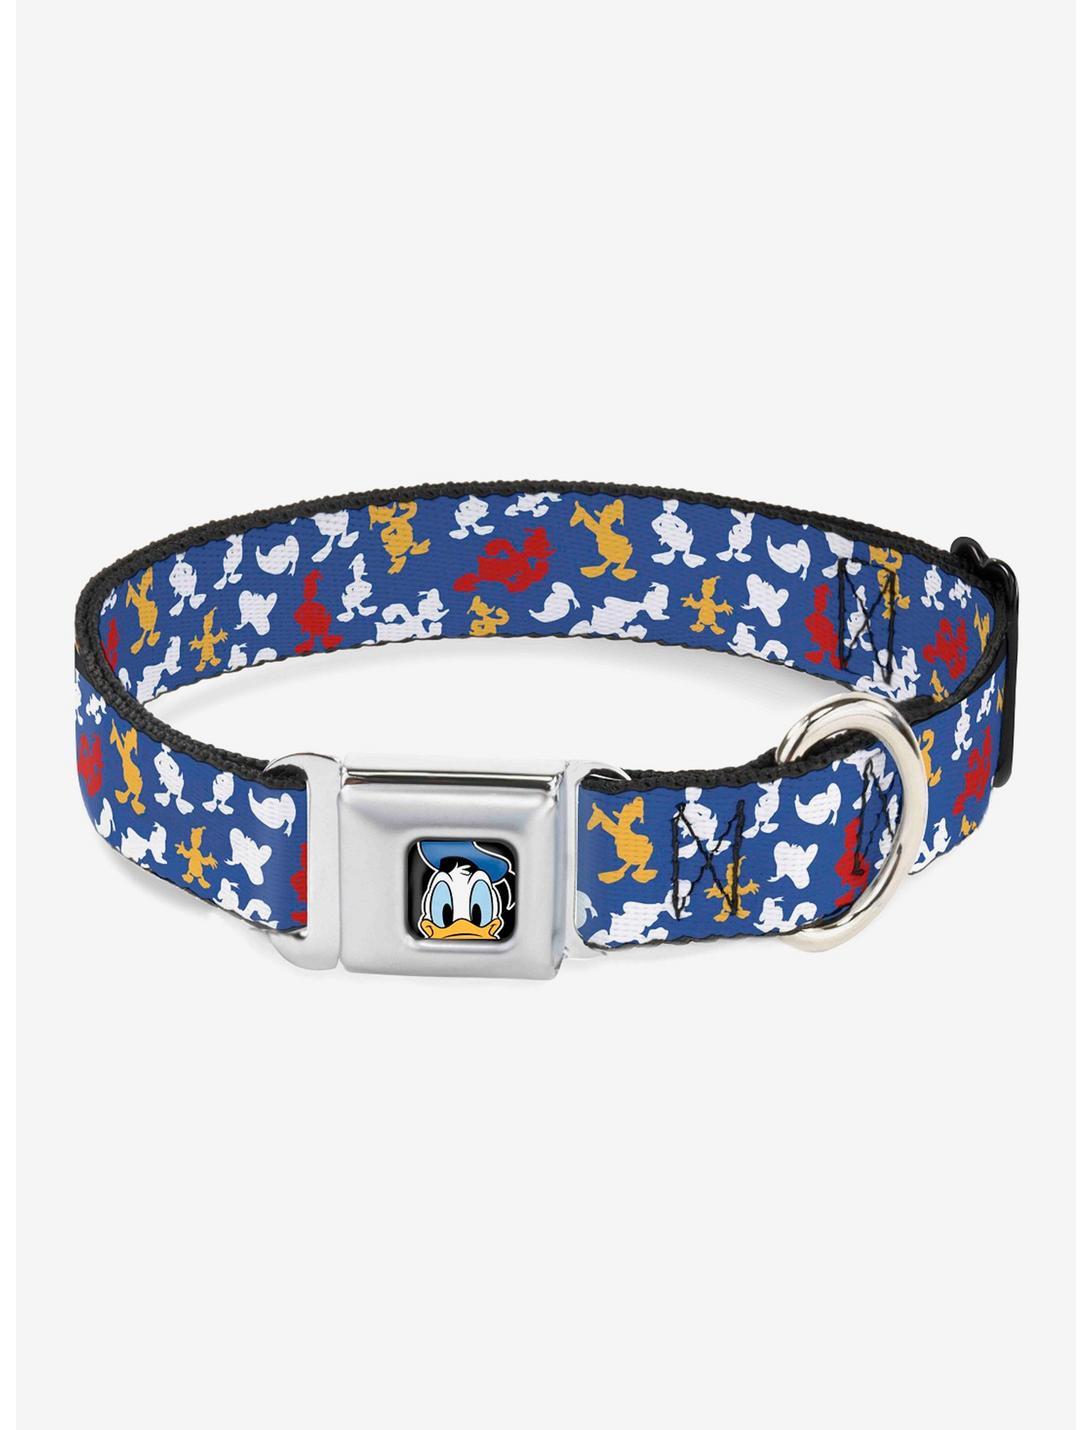 Disney Donald Duck Face Poses Scattered Blue White Red Yellow Seatbelt Buckle Dog Collar, BLUE, hi-res